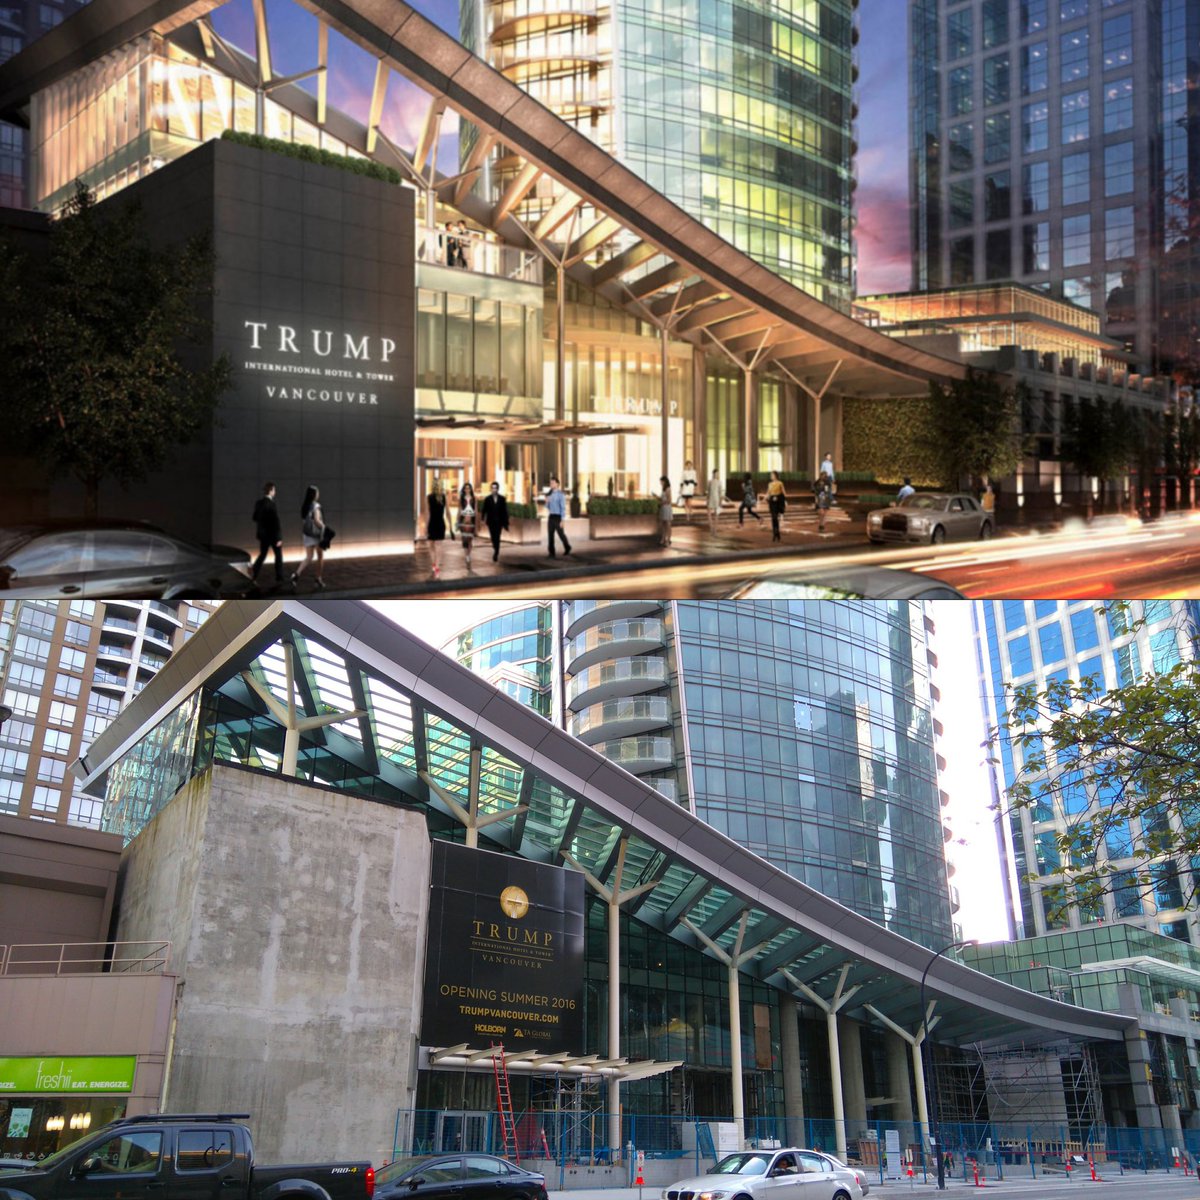 #RenderVsReality not bad apart from the massive horrible concrete block! #architecture #3D #Vancouver #Trump